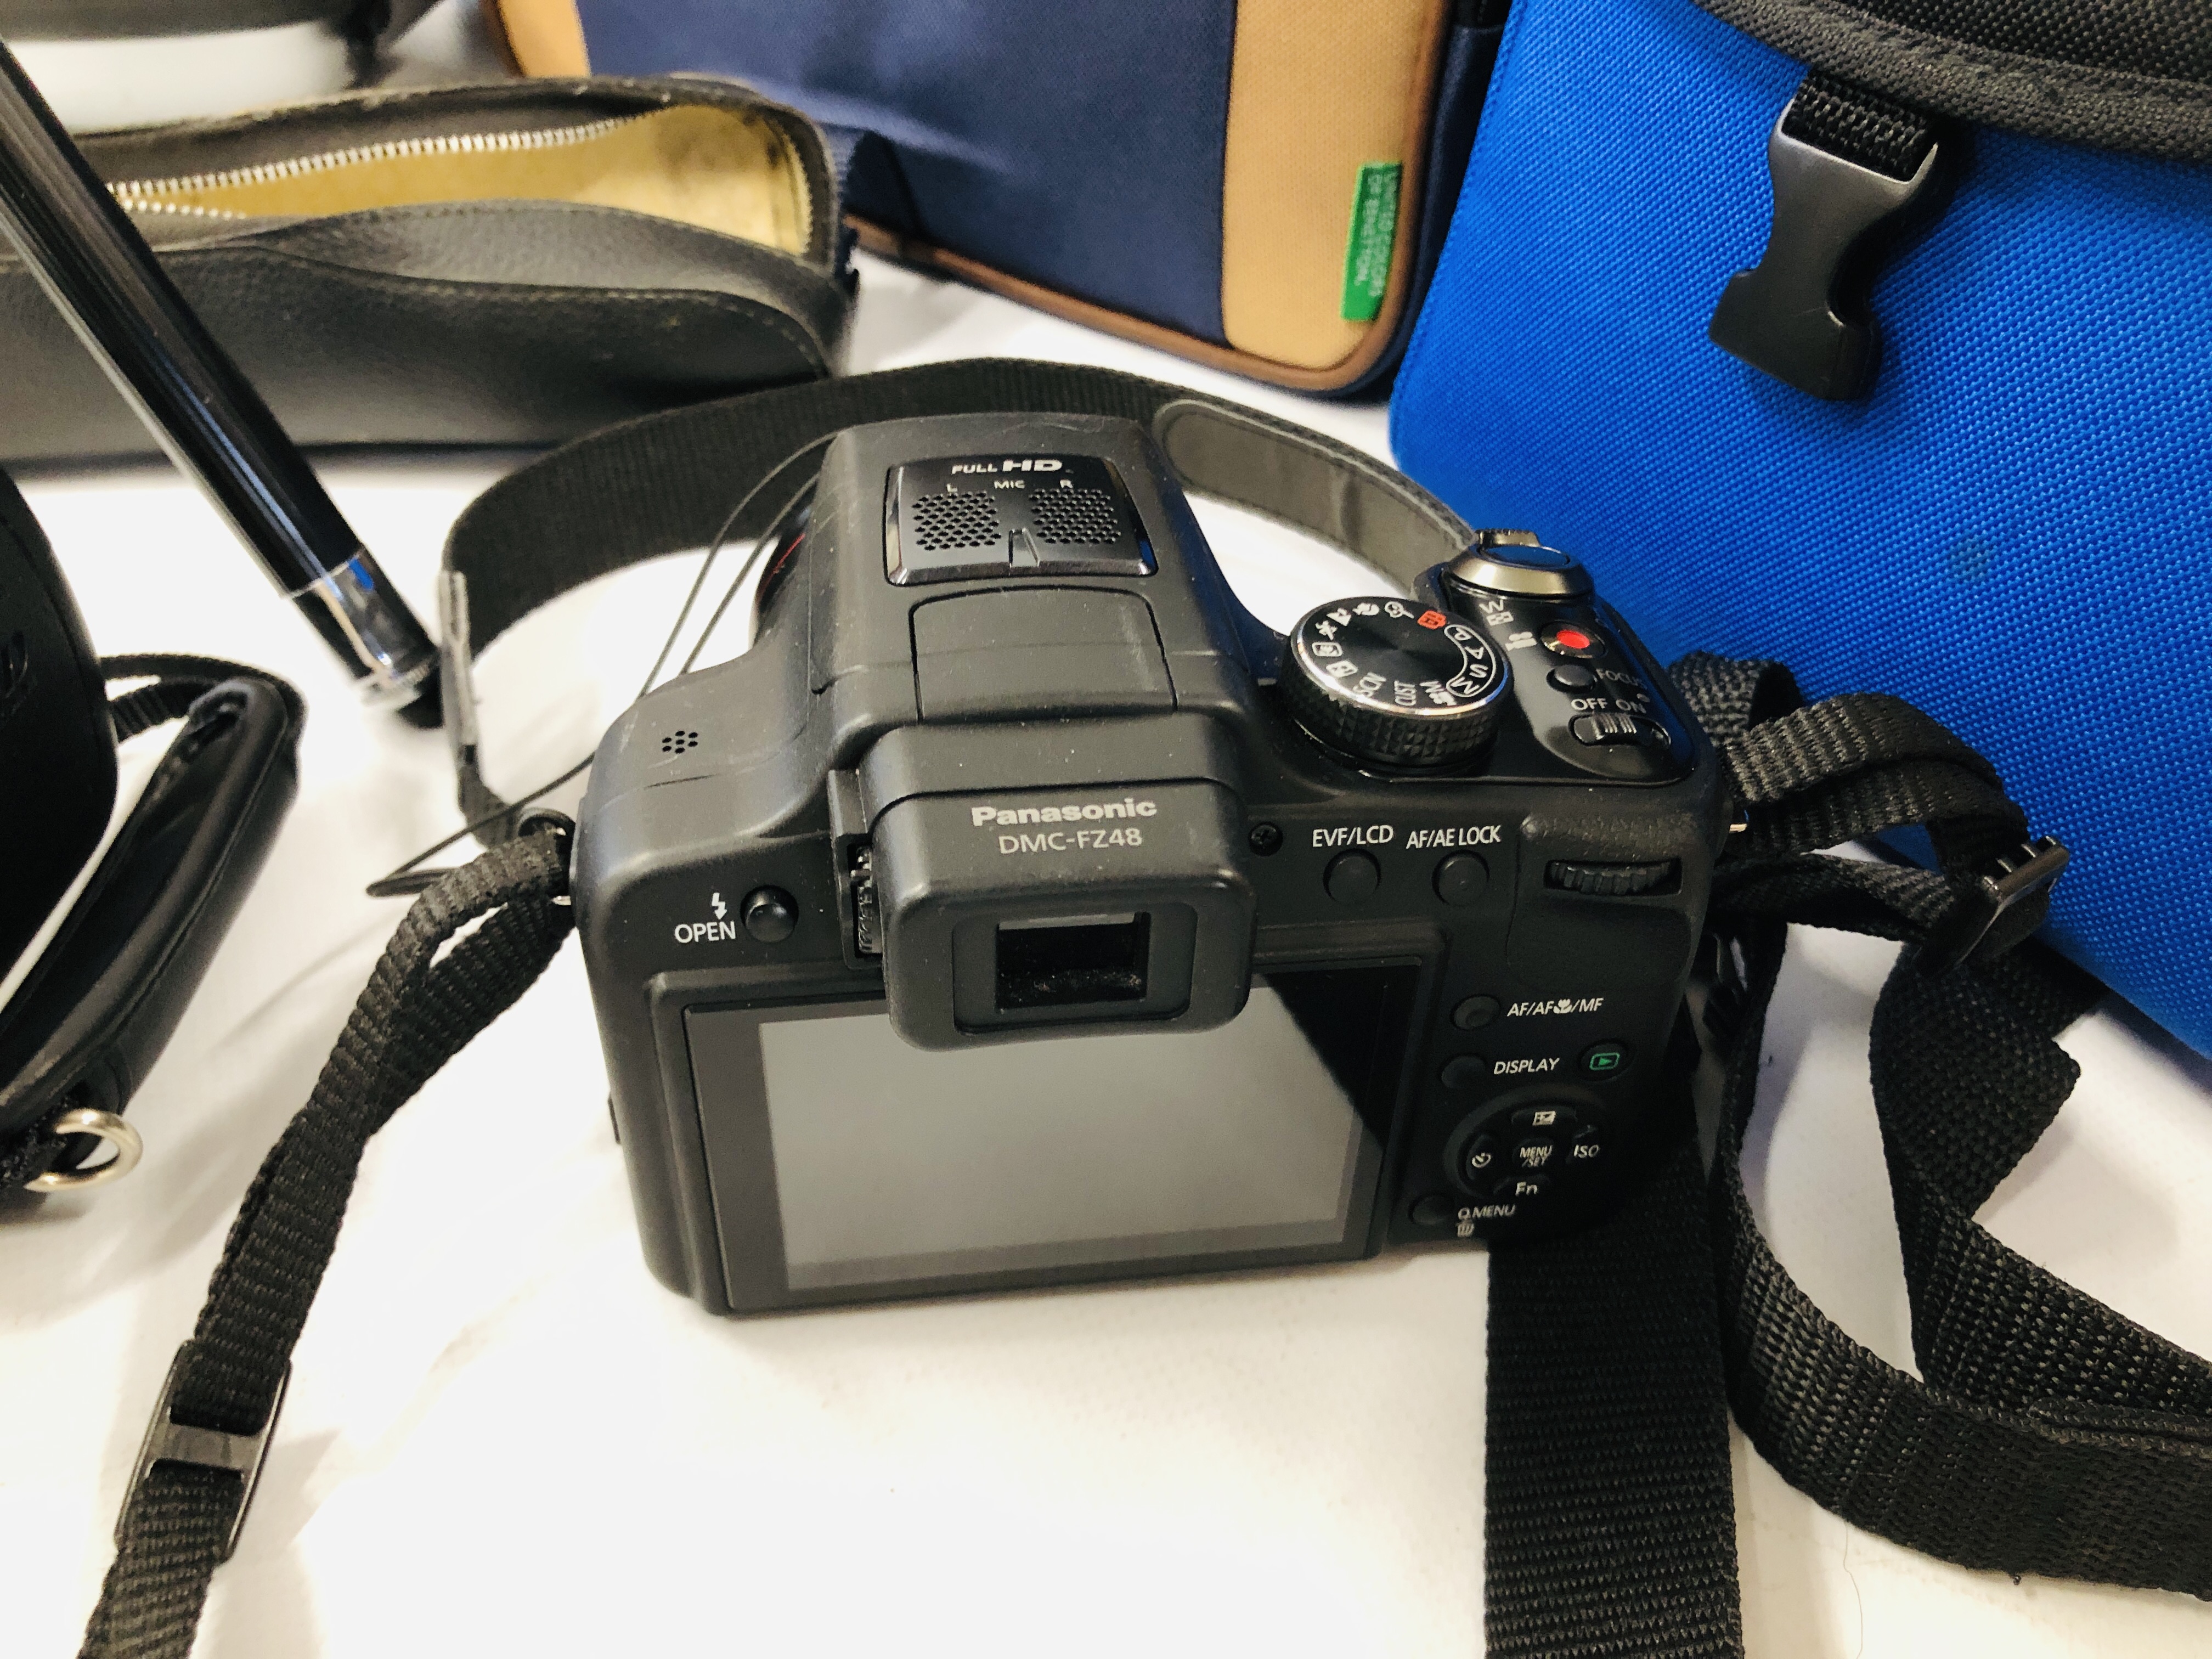 SONY HANDY CAM DCR-SR35 WITH CARRY BAG AND ACCESSORIES, - Image 6 of 6